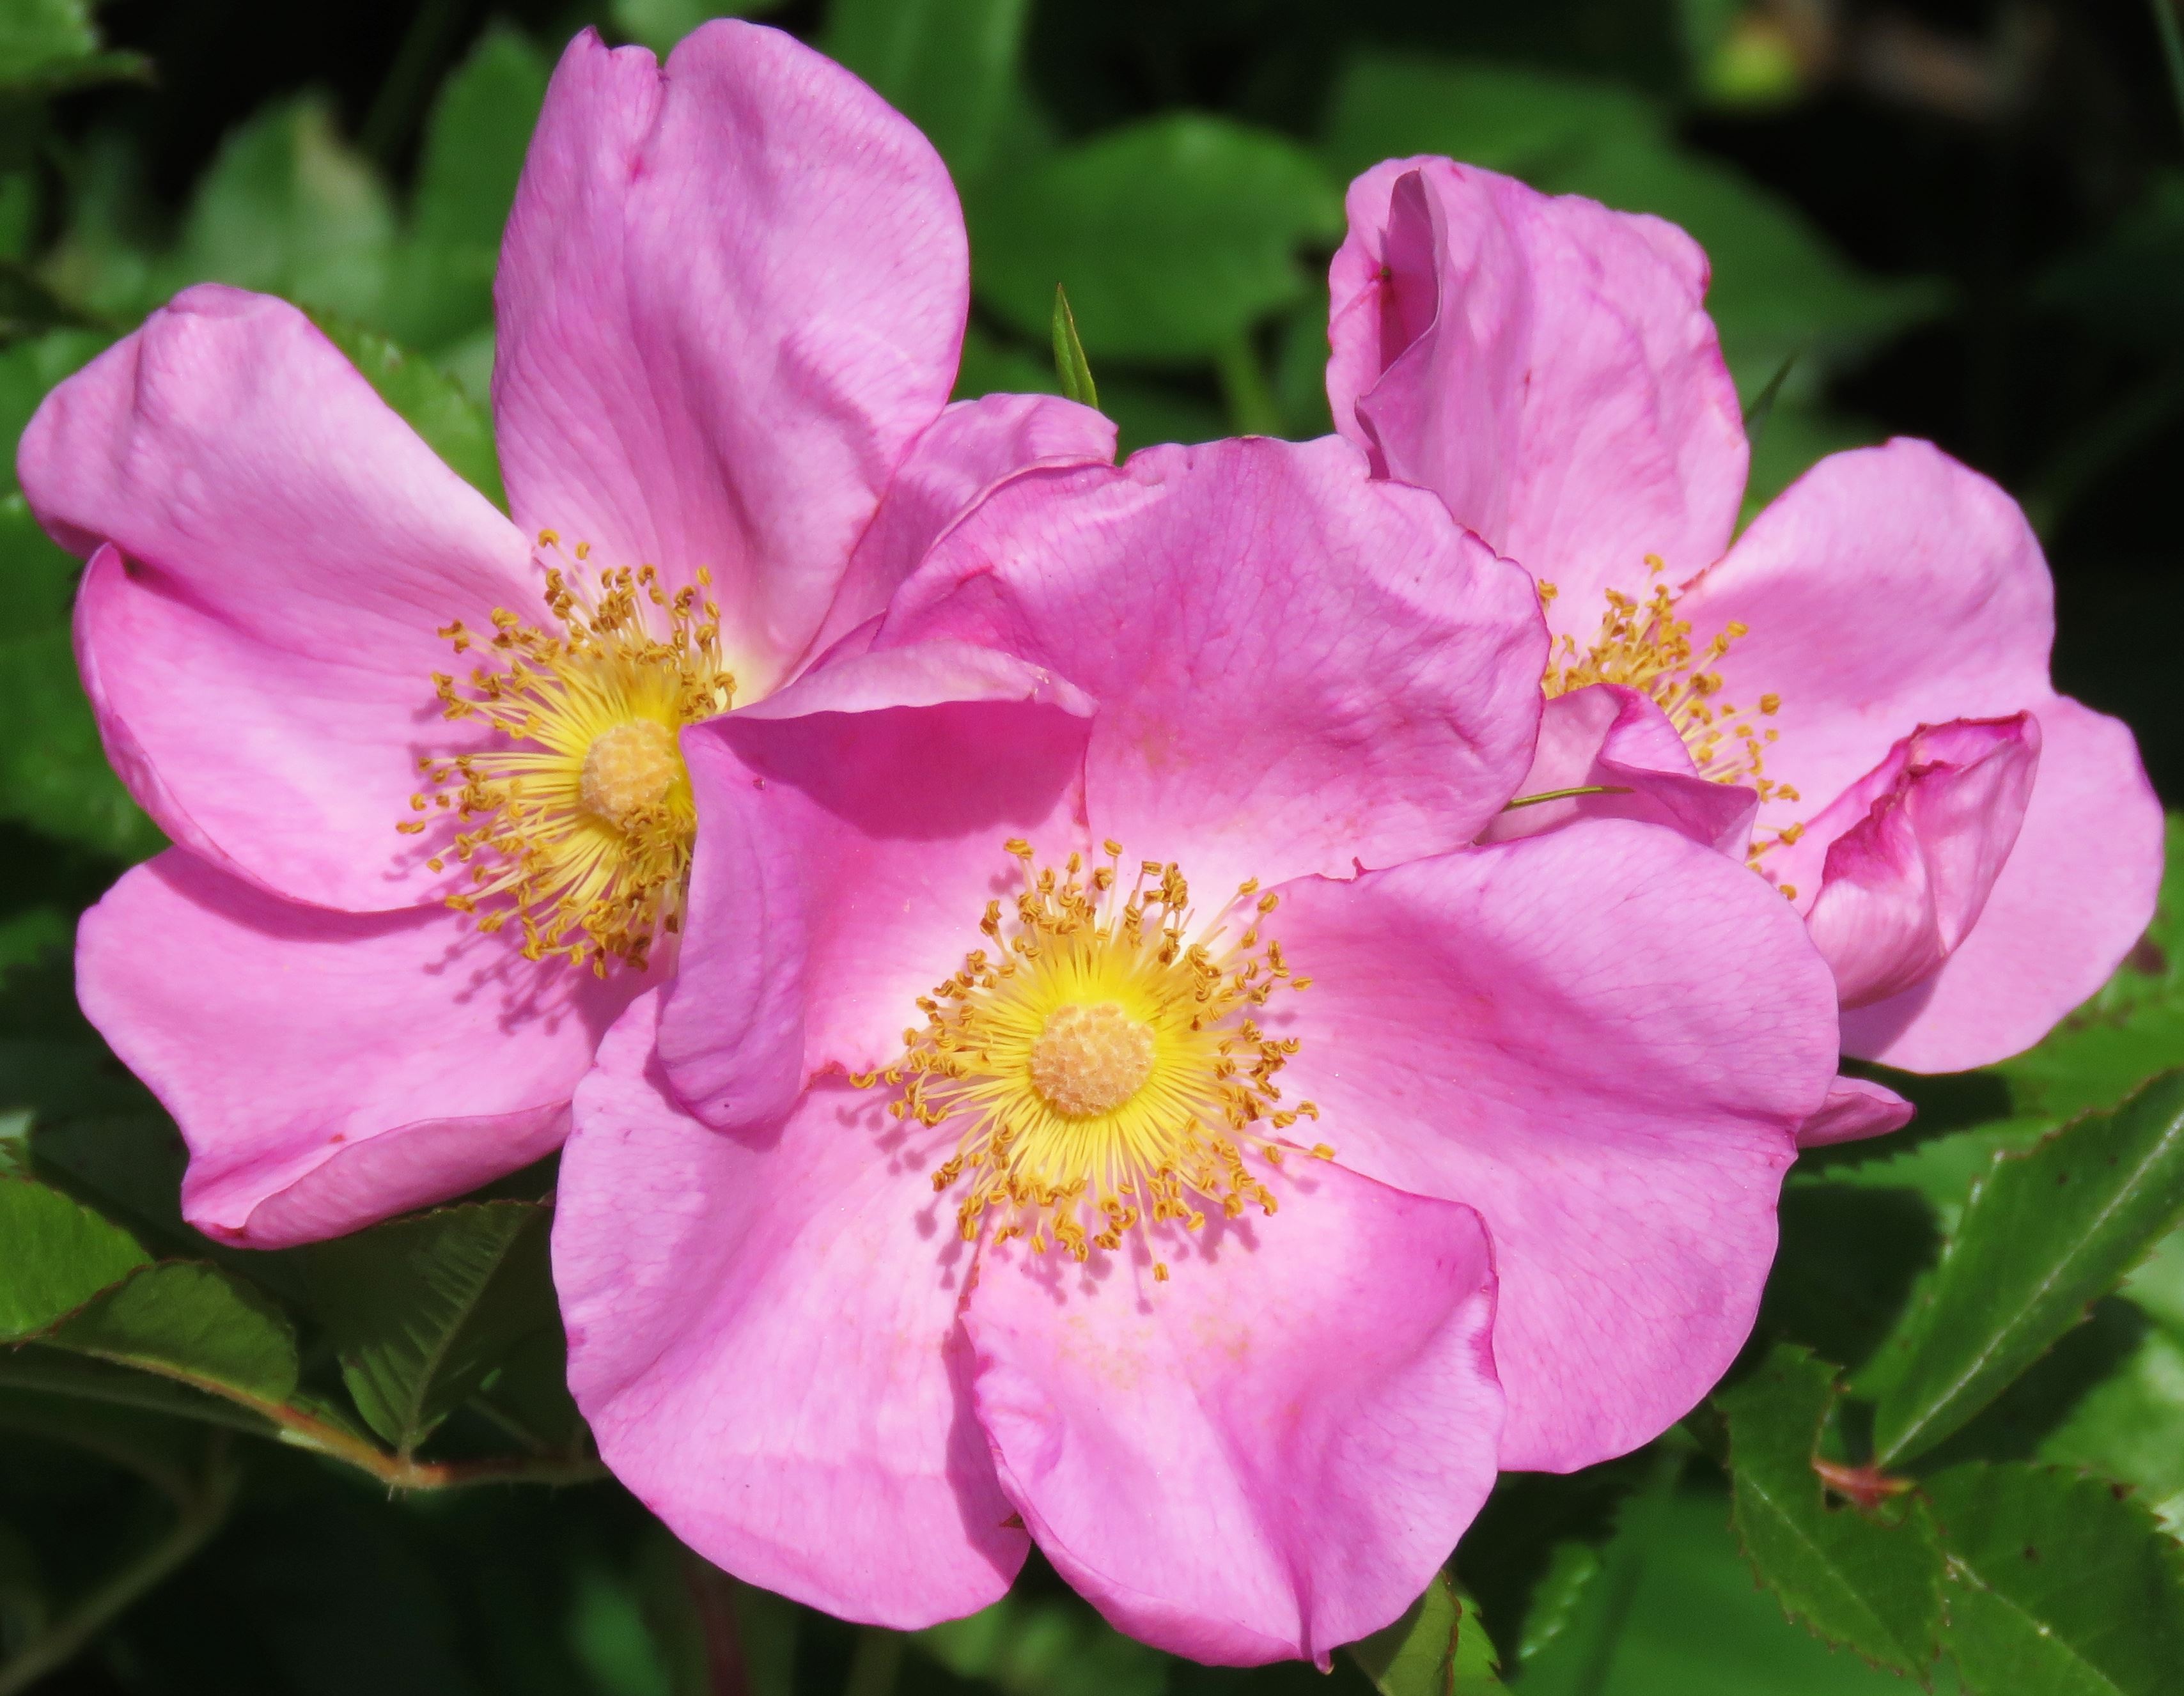 Wild roses by the Millers River